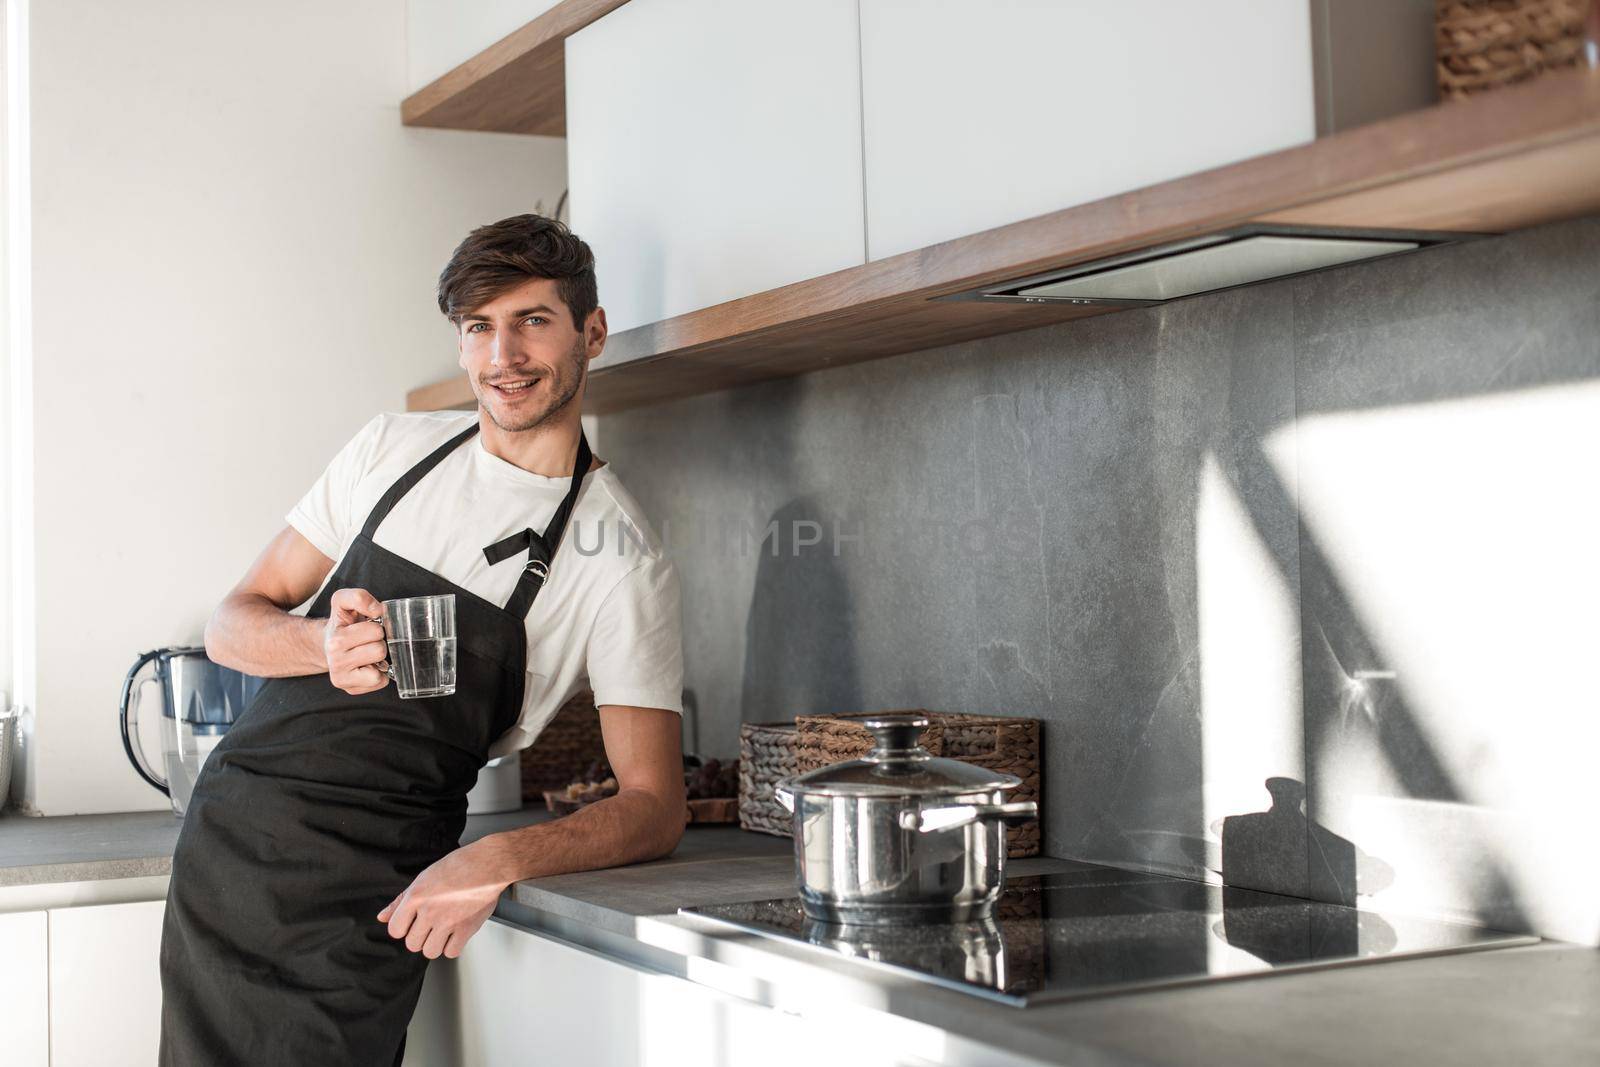 smiling young man with a glass of water standing in the home kitchen. photo with copy space